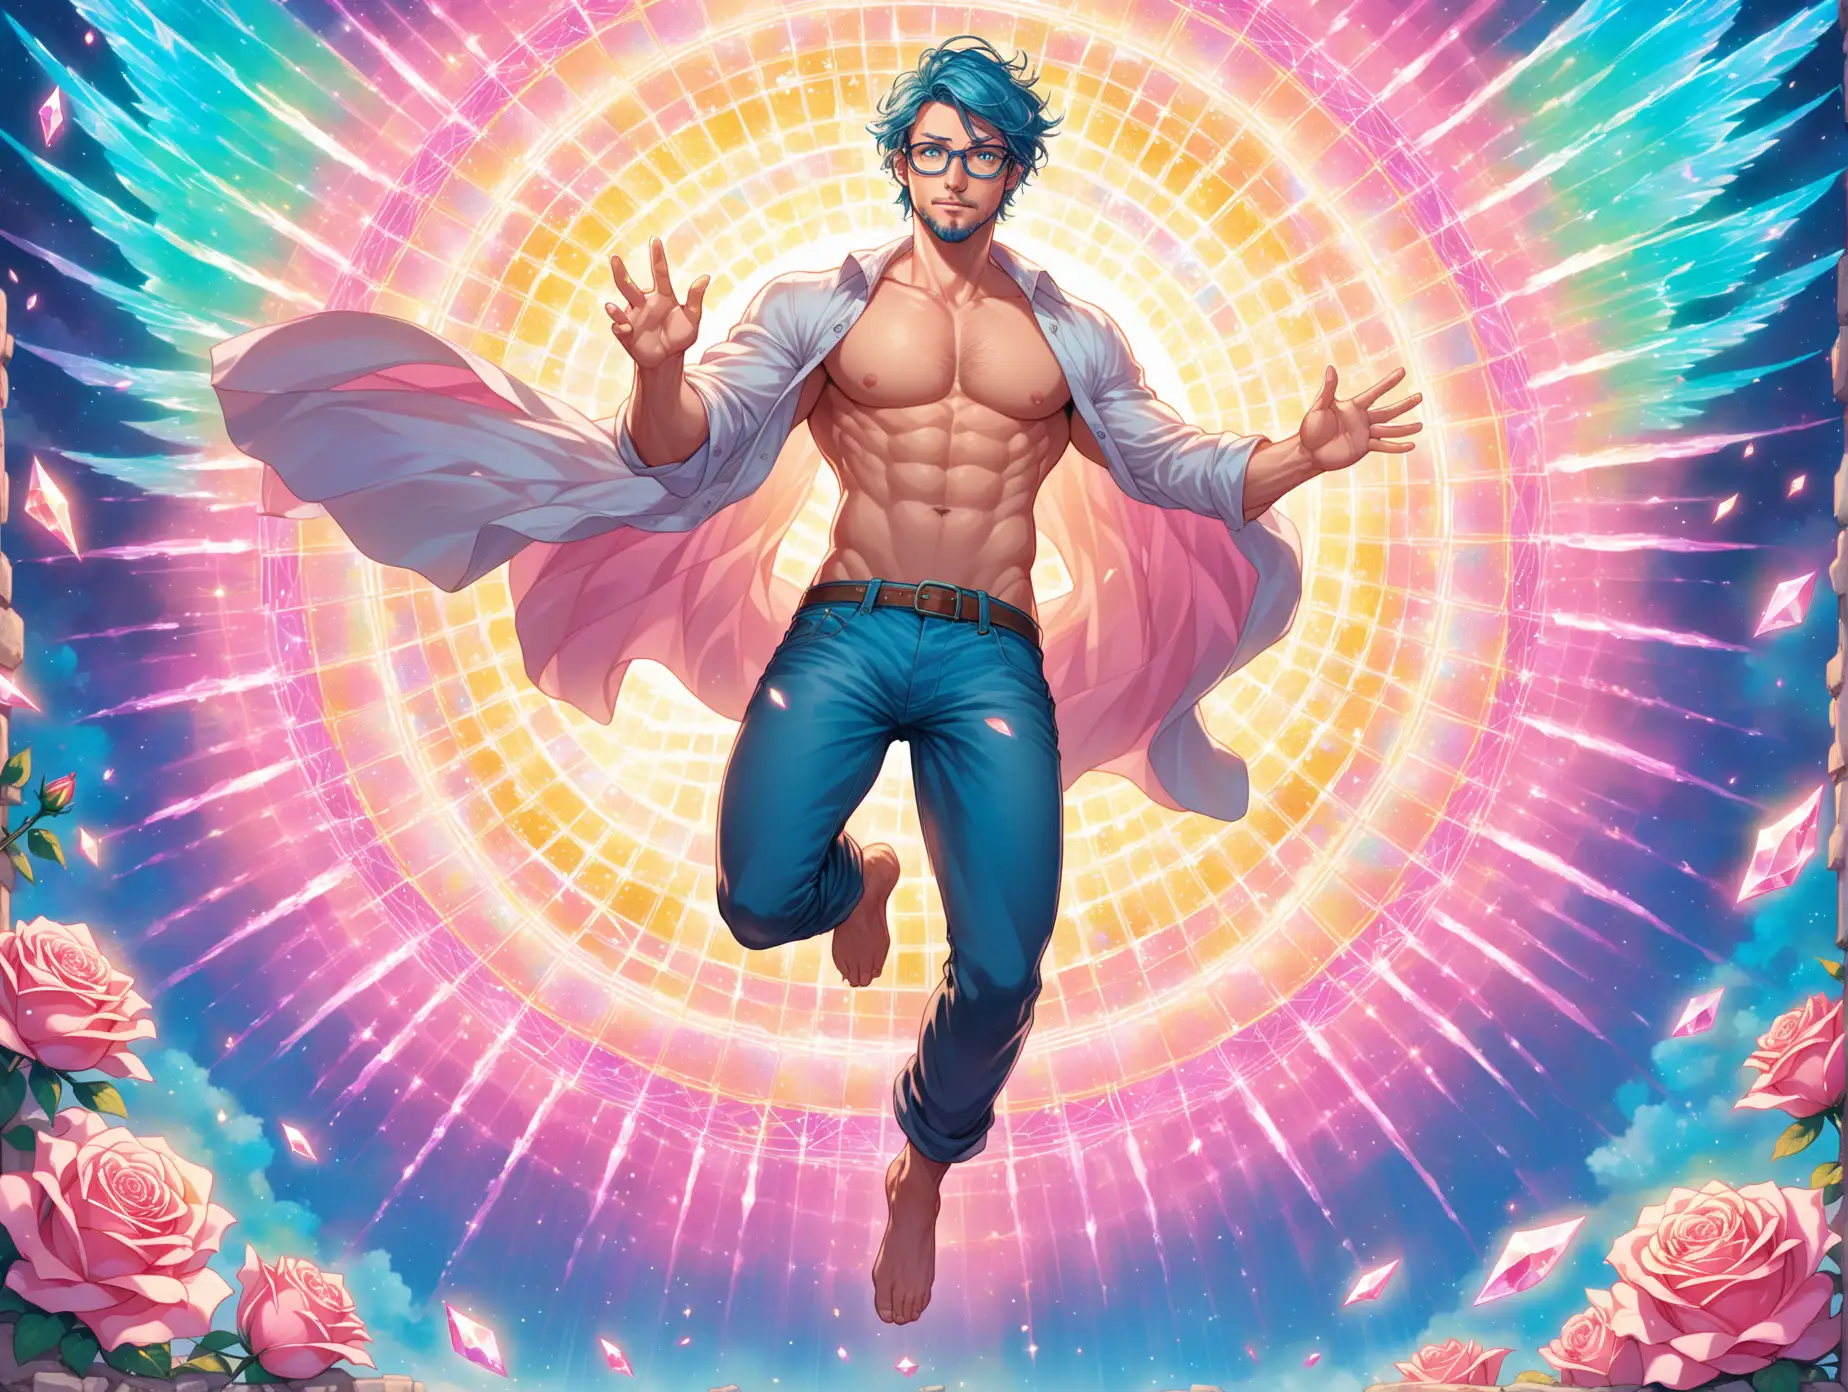 In a breathtaking display of power and transformation, a 30 something shirtless hunk with glasses and mesmerizing aquamarine eyes and short navy blue hair leaps into the air. His rugged 5 o'clock shadow adds to his rugged charm as he defies gravity, suspended in mid-air. Clad only in casual jeans, his open pink shirt hangs in tatters, fluttering around him like a banner in the wind. As he ascends, a brilliant aquamarine aura radiates from the circular energy crystal embedded in the center of his chest. The crystal pulses with energy, casting a dazzling glow that illuminates the surrounding rose garden.